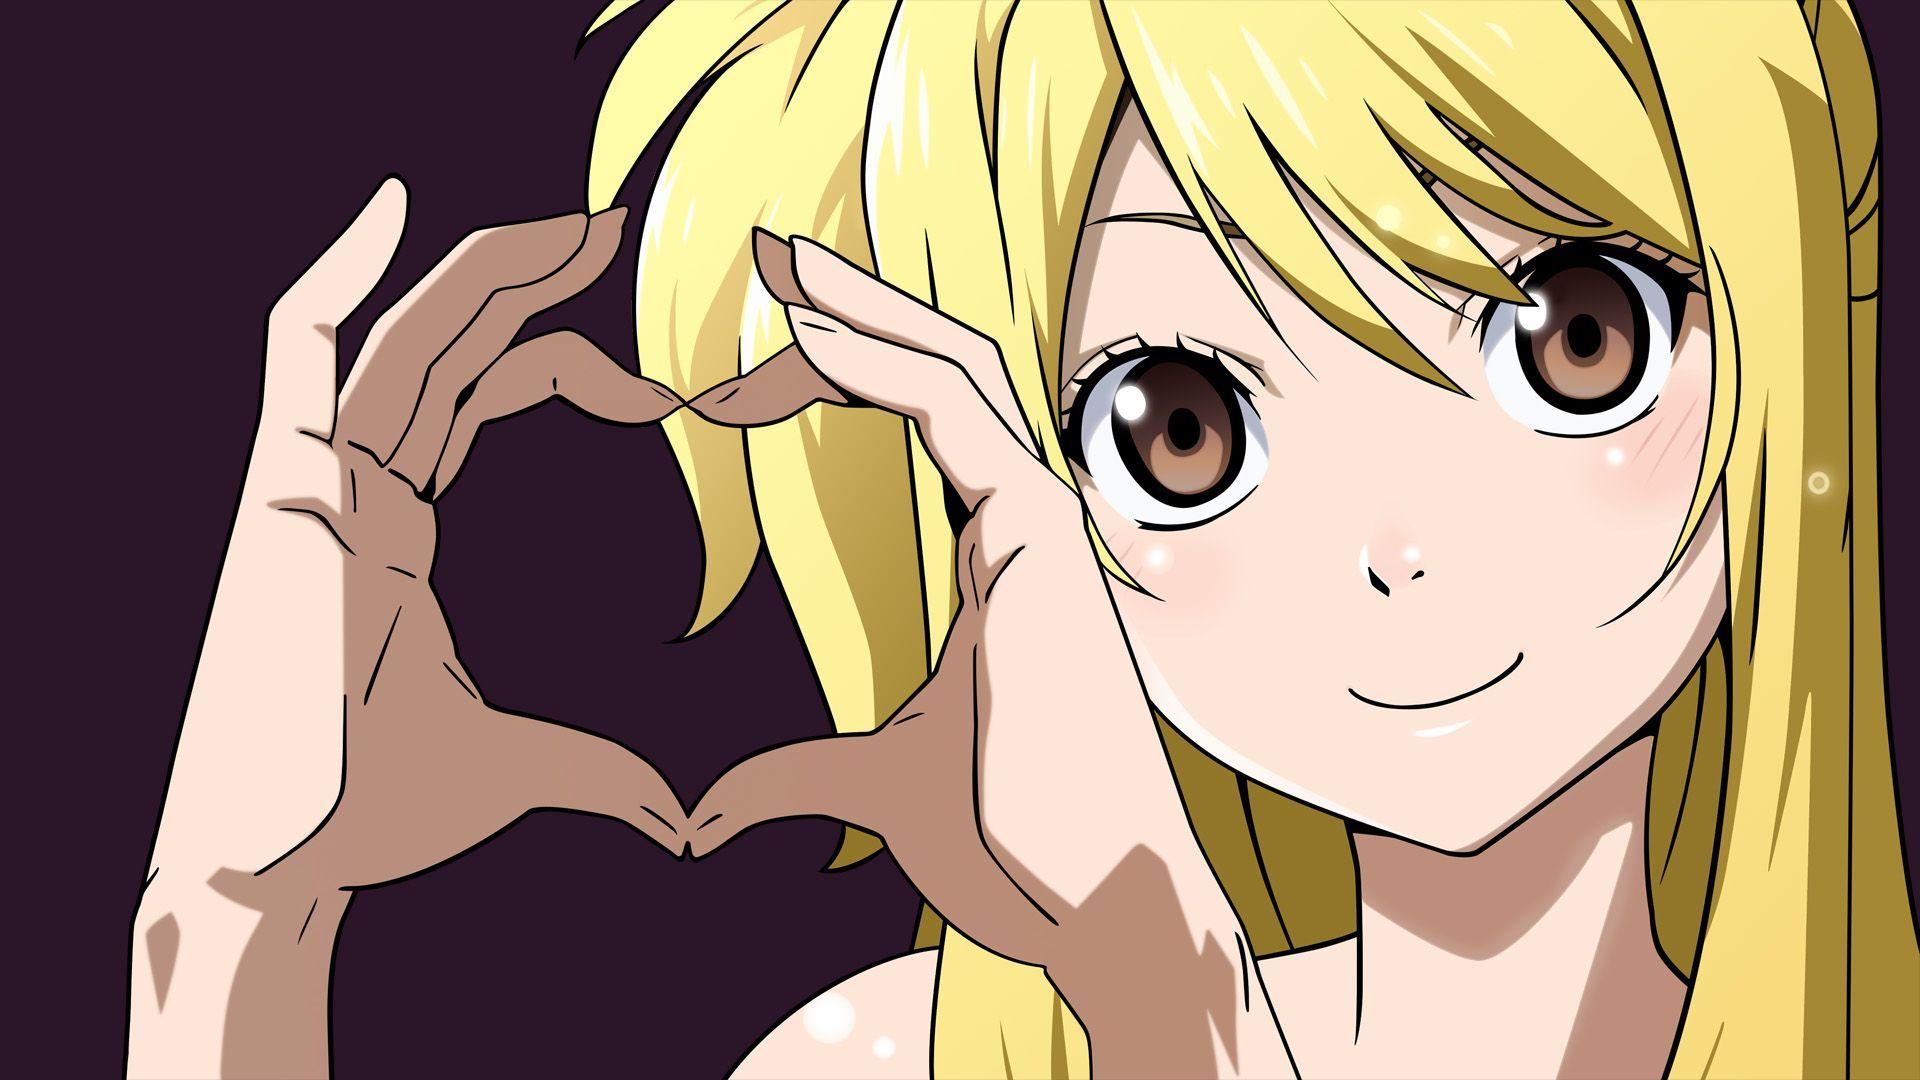 Lucy Heartfilia Fairy Tail Wallpaper Wallpaper 1080p. Lucy's